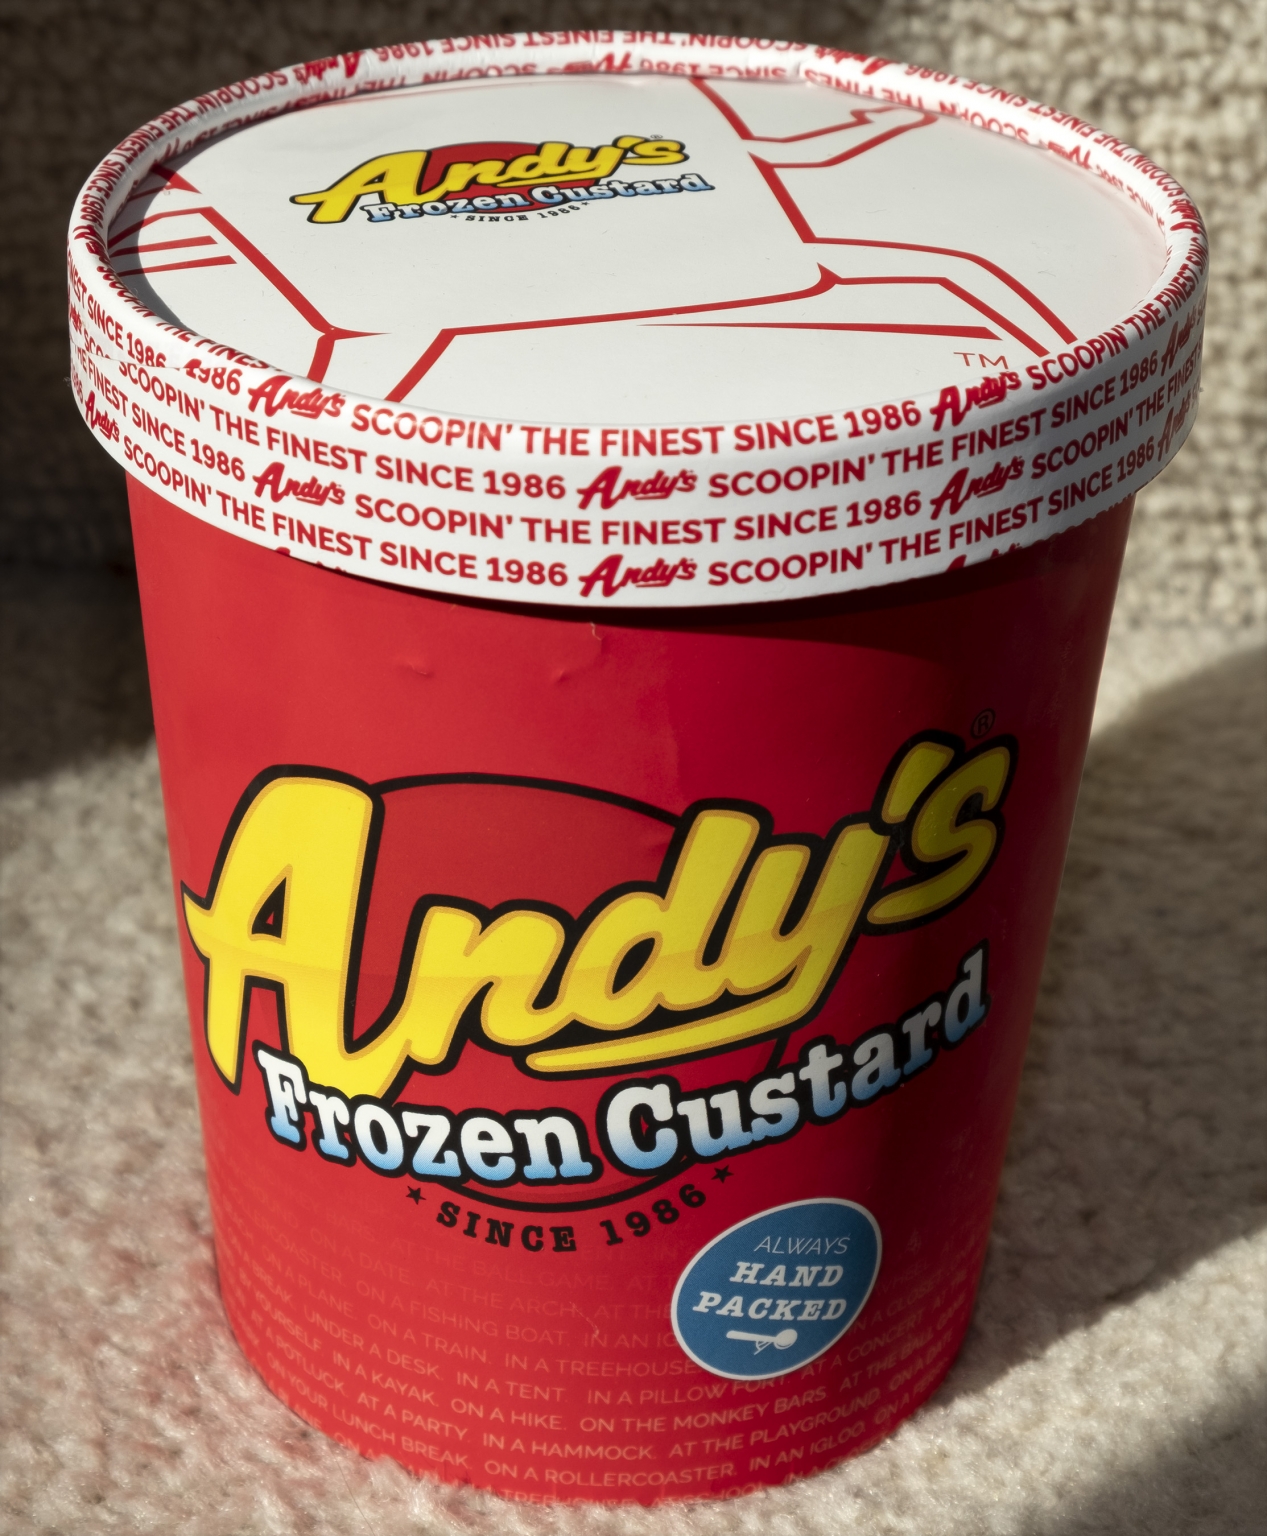 andy frozen custard delivery